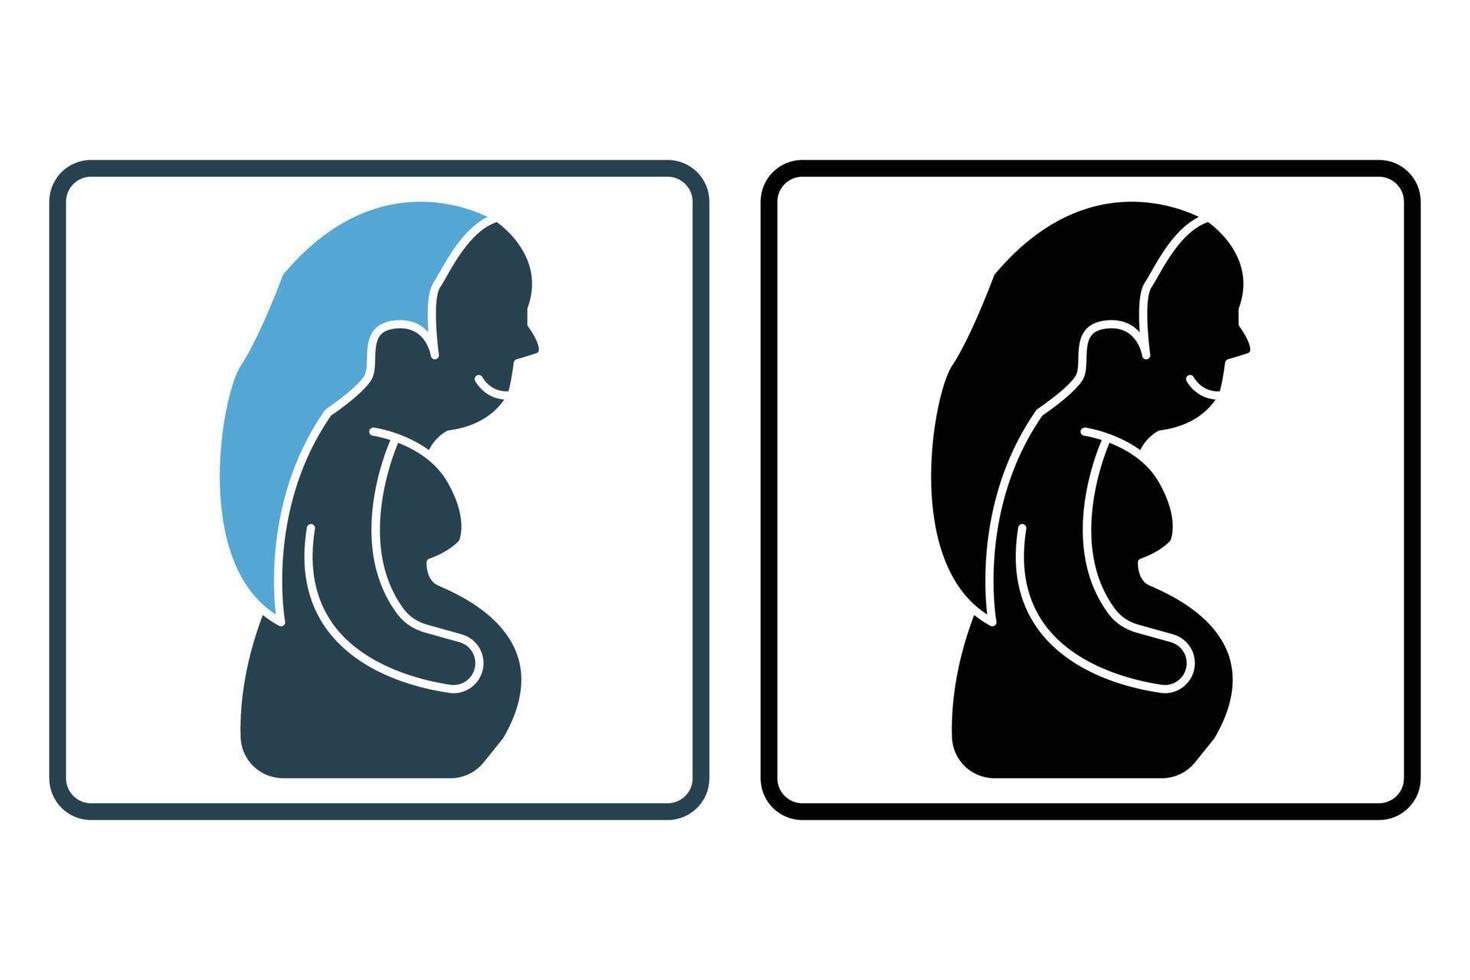 Pregnant icon illustration. icon related to baby care. Solid icon style. Simple vector design editable